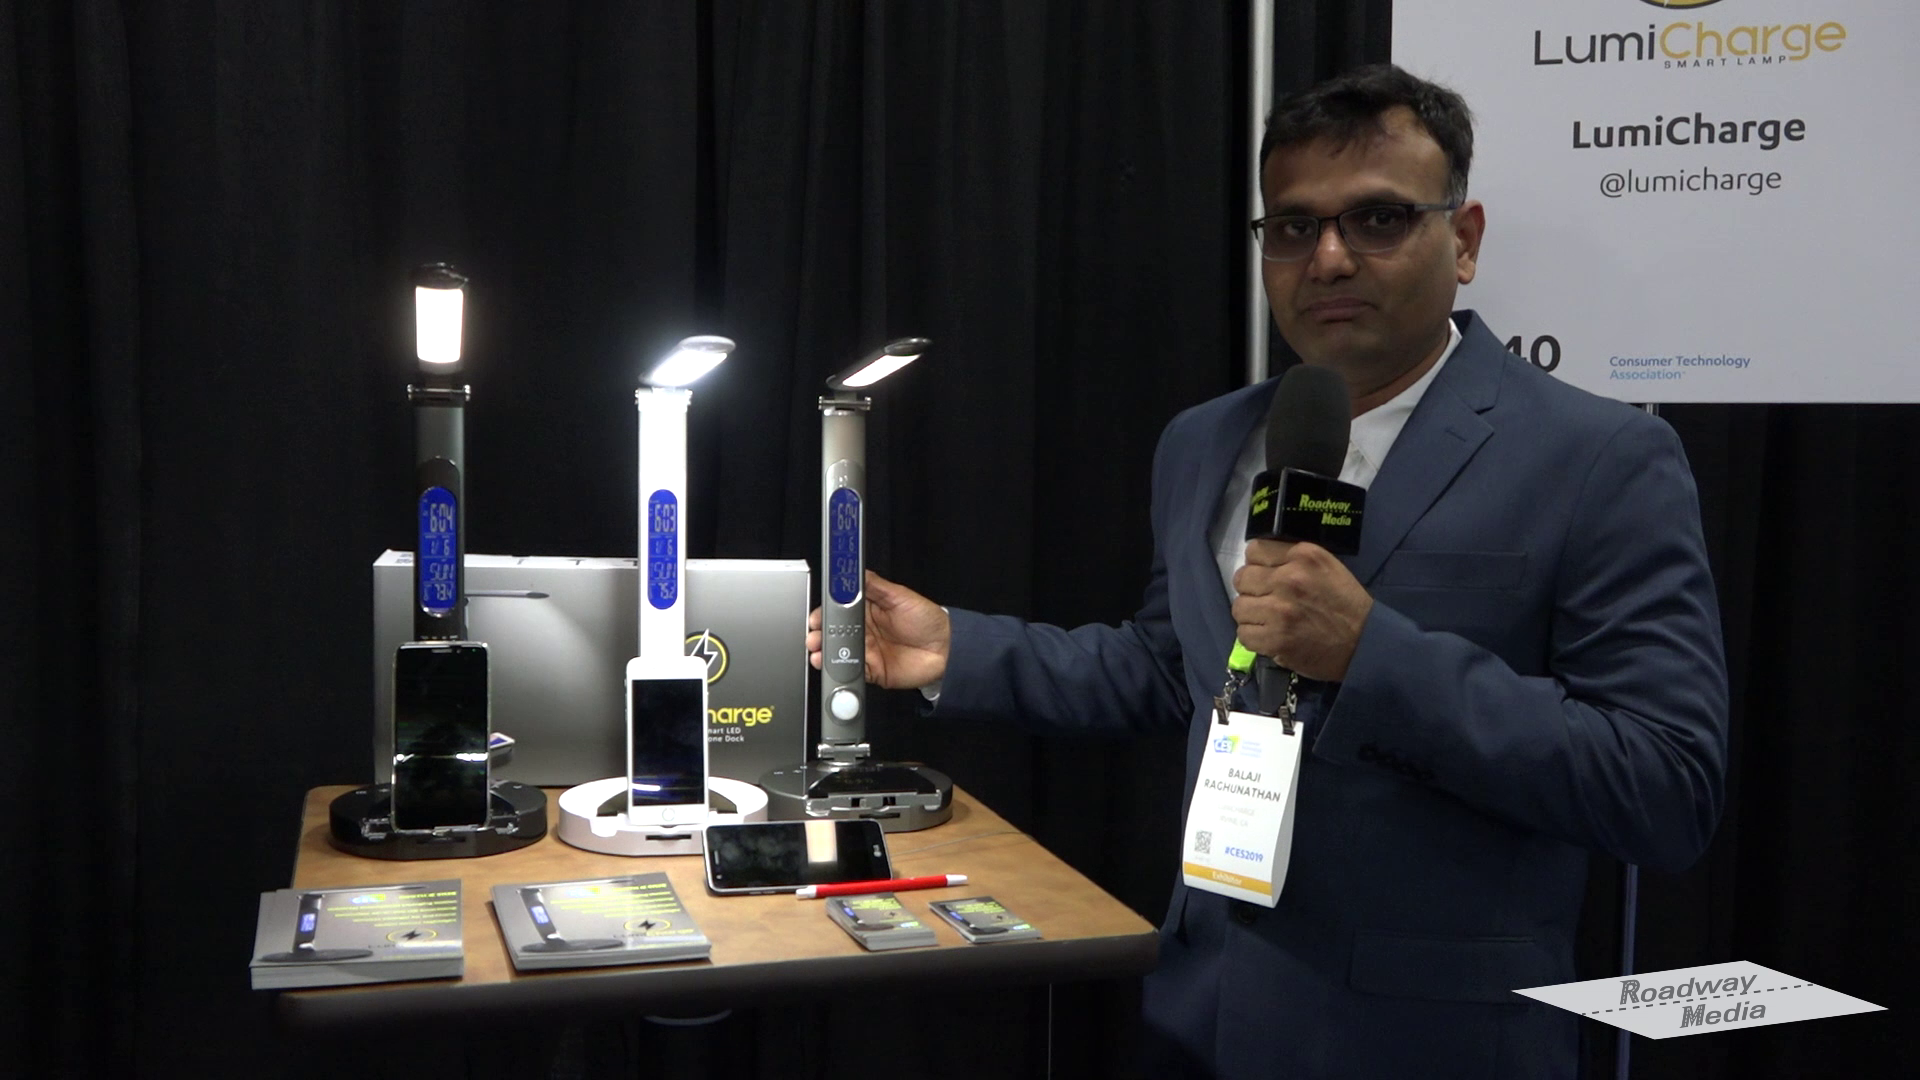 Second generation of LED lamps from Lumi Charge at CES 2019